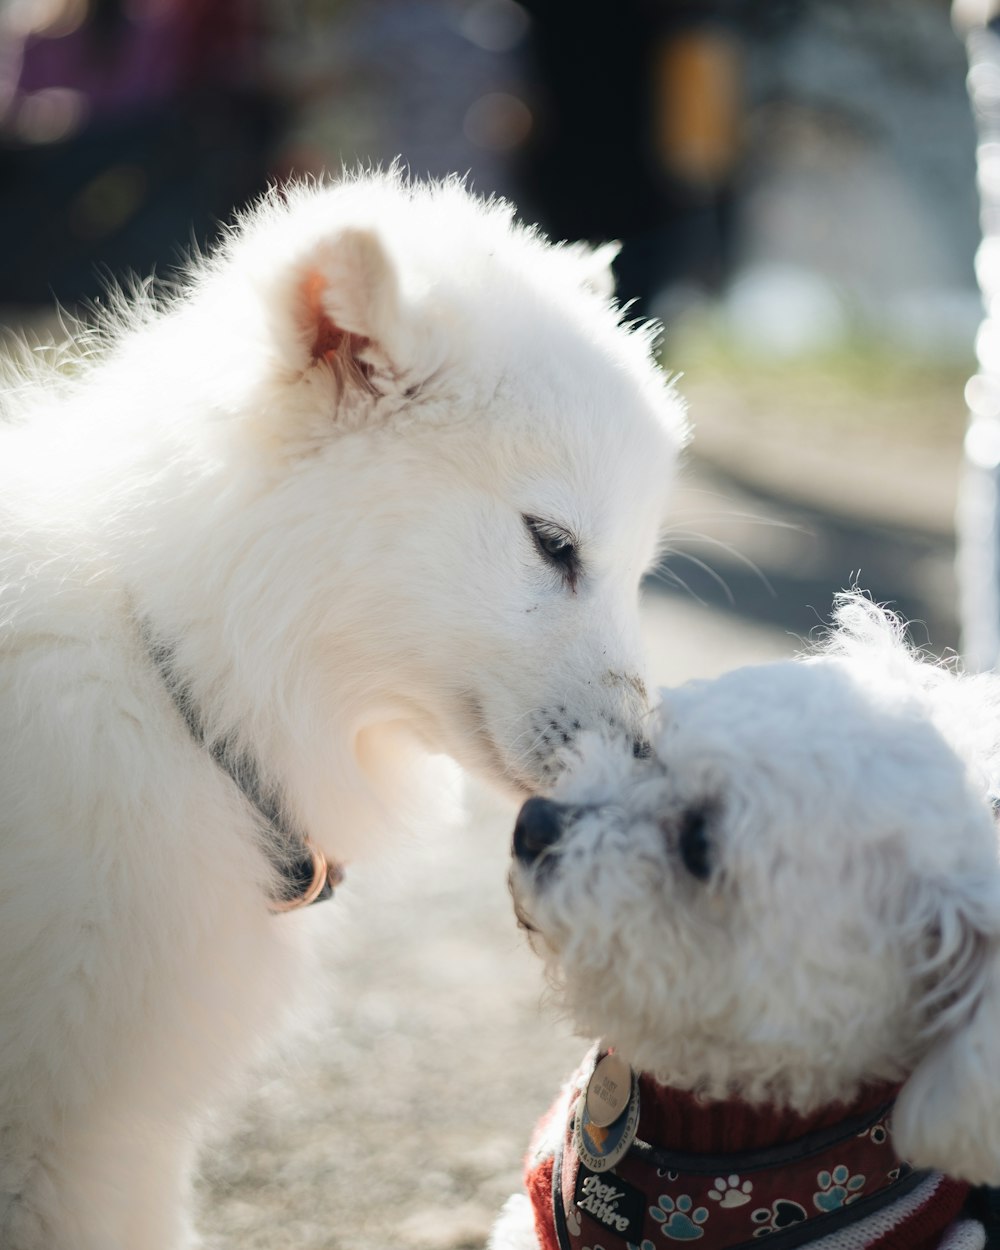 a white dog licking another white dog's face